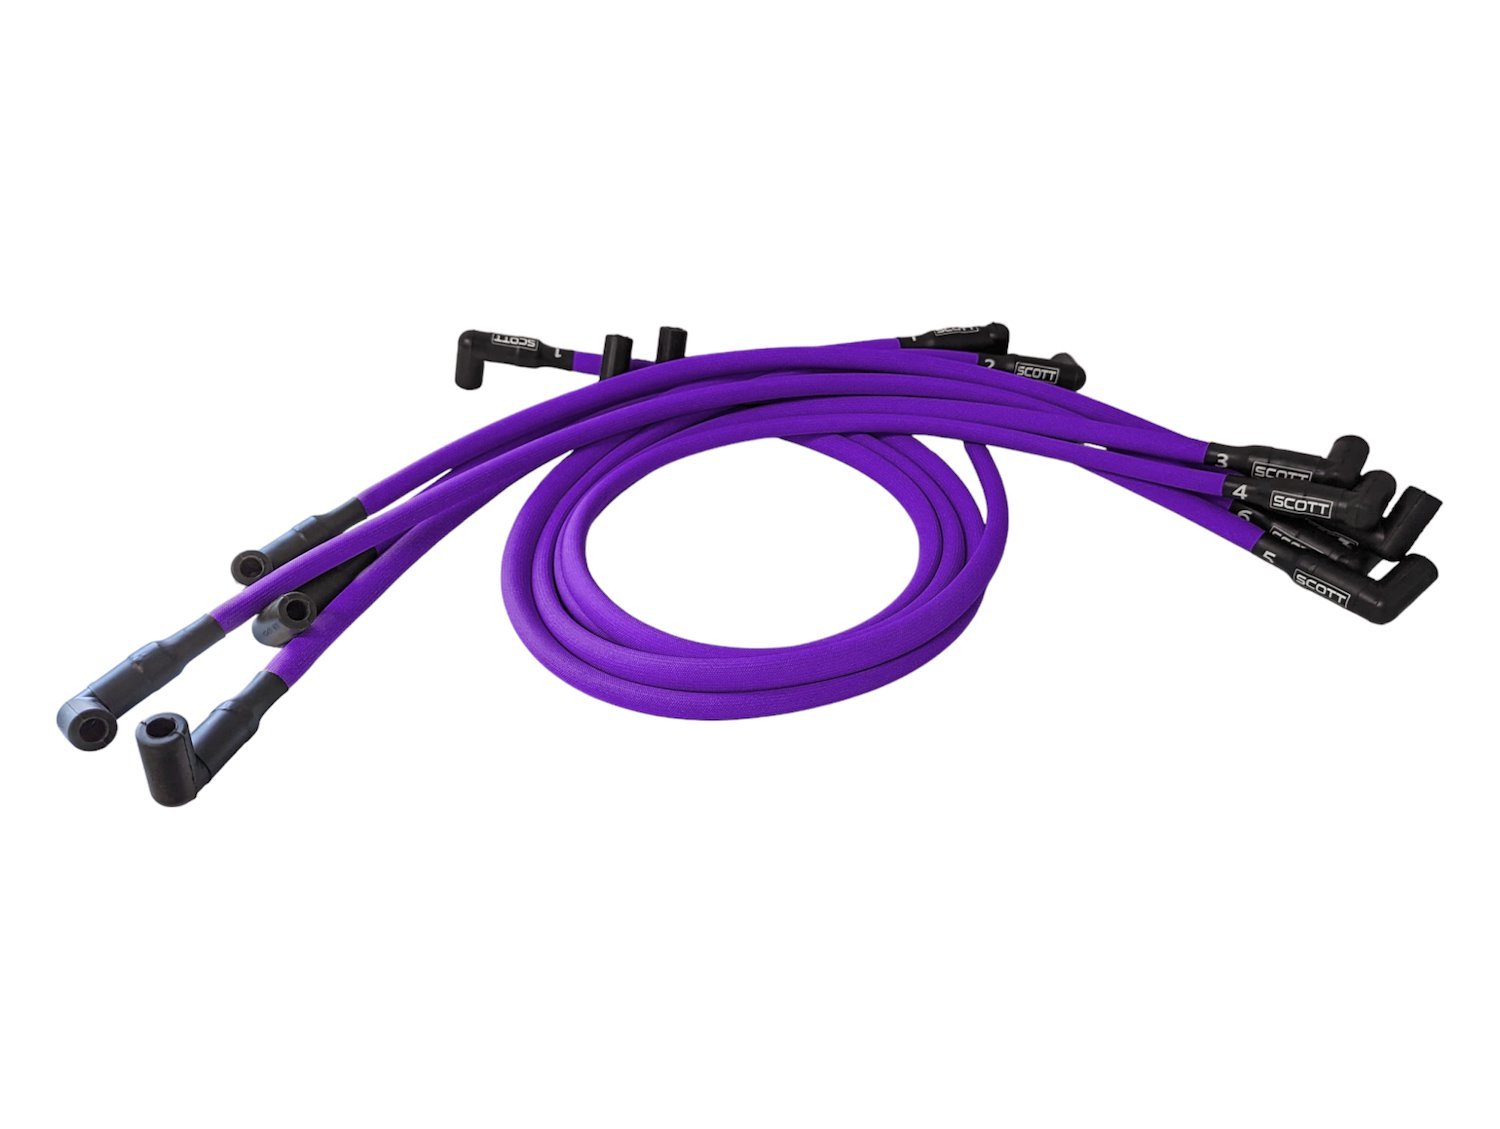 SPW300-PS-416-7 Super Mag Fiberglass-Oversleeved Spark Plug Wire Set for Big Block Chevy, Under Header [Purple]